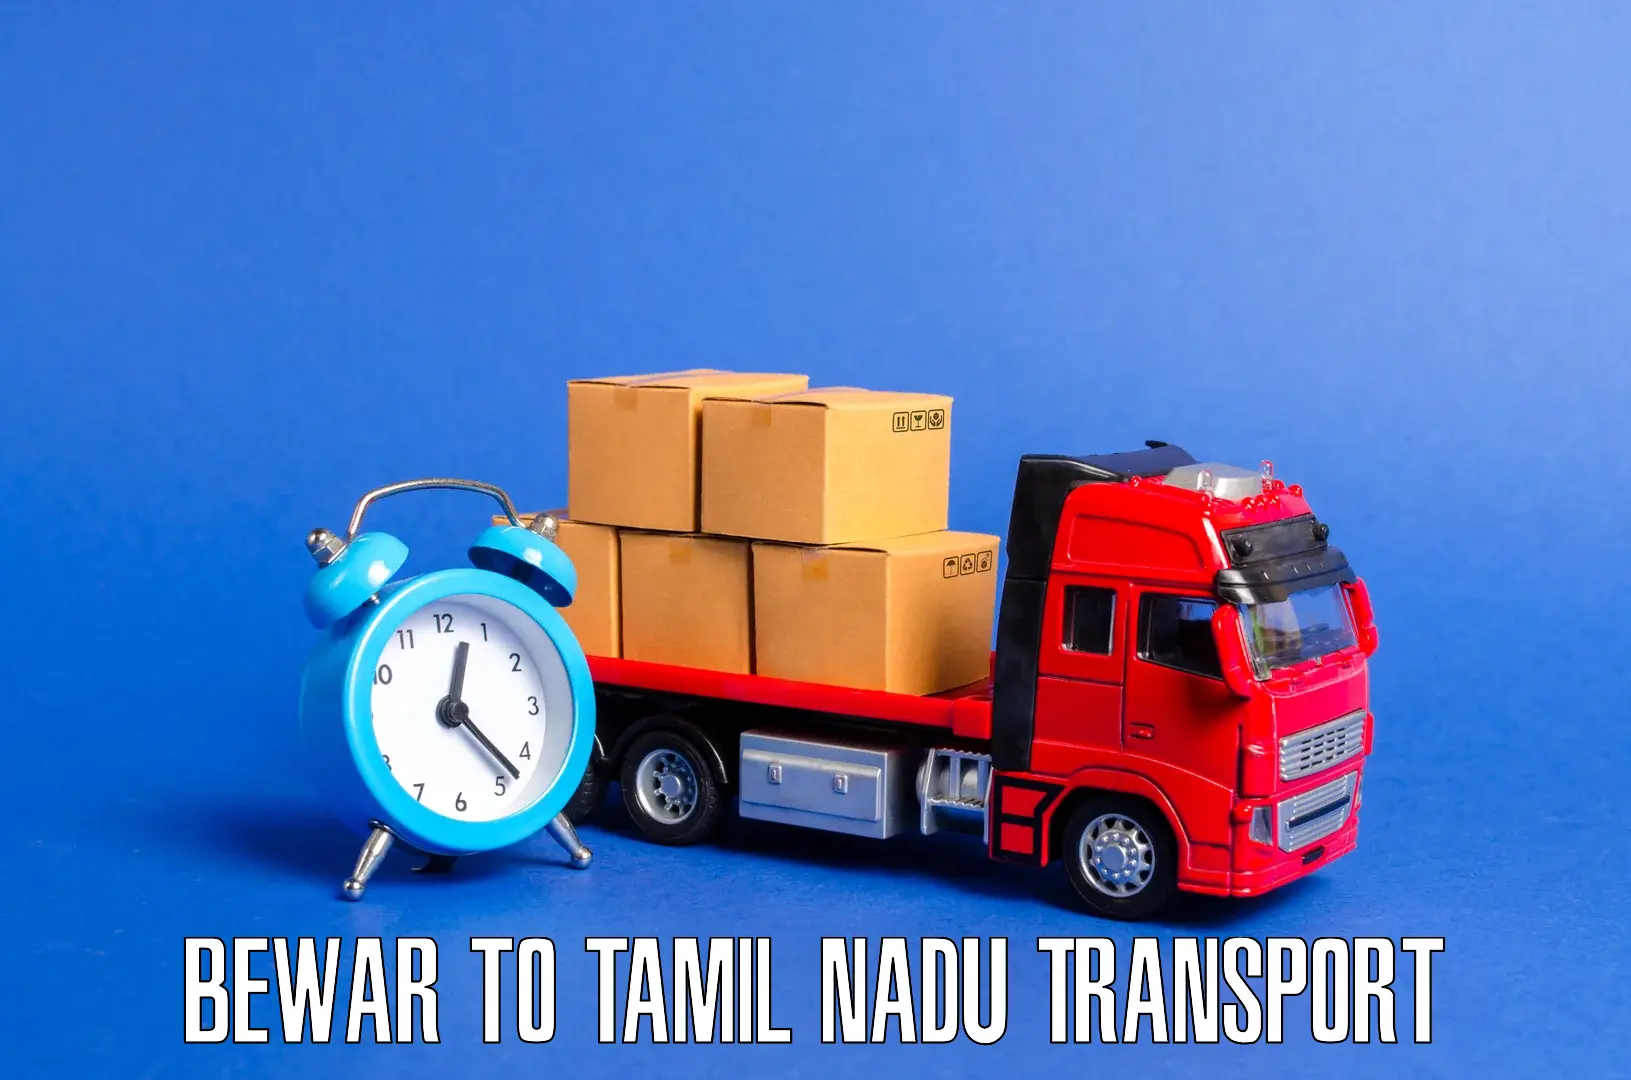 Pick up transport service Bewar to Bharath Institute of Higher Education and Research Chennai